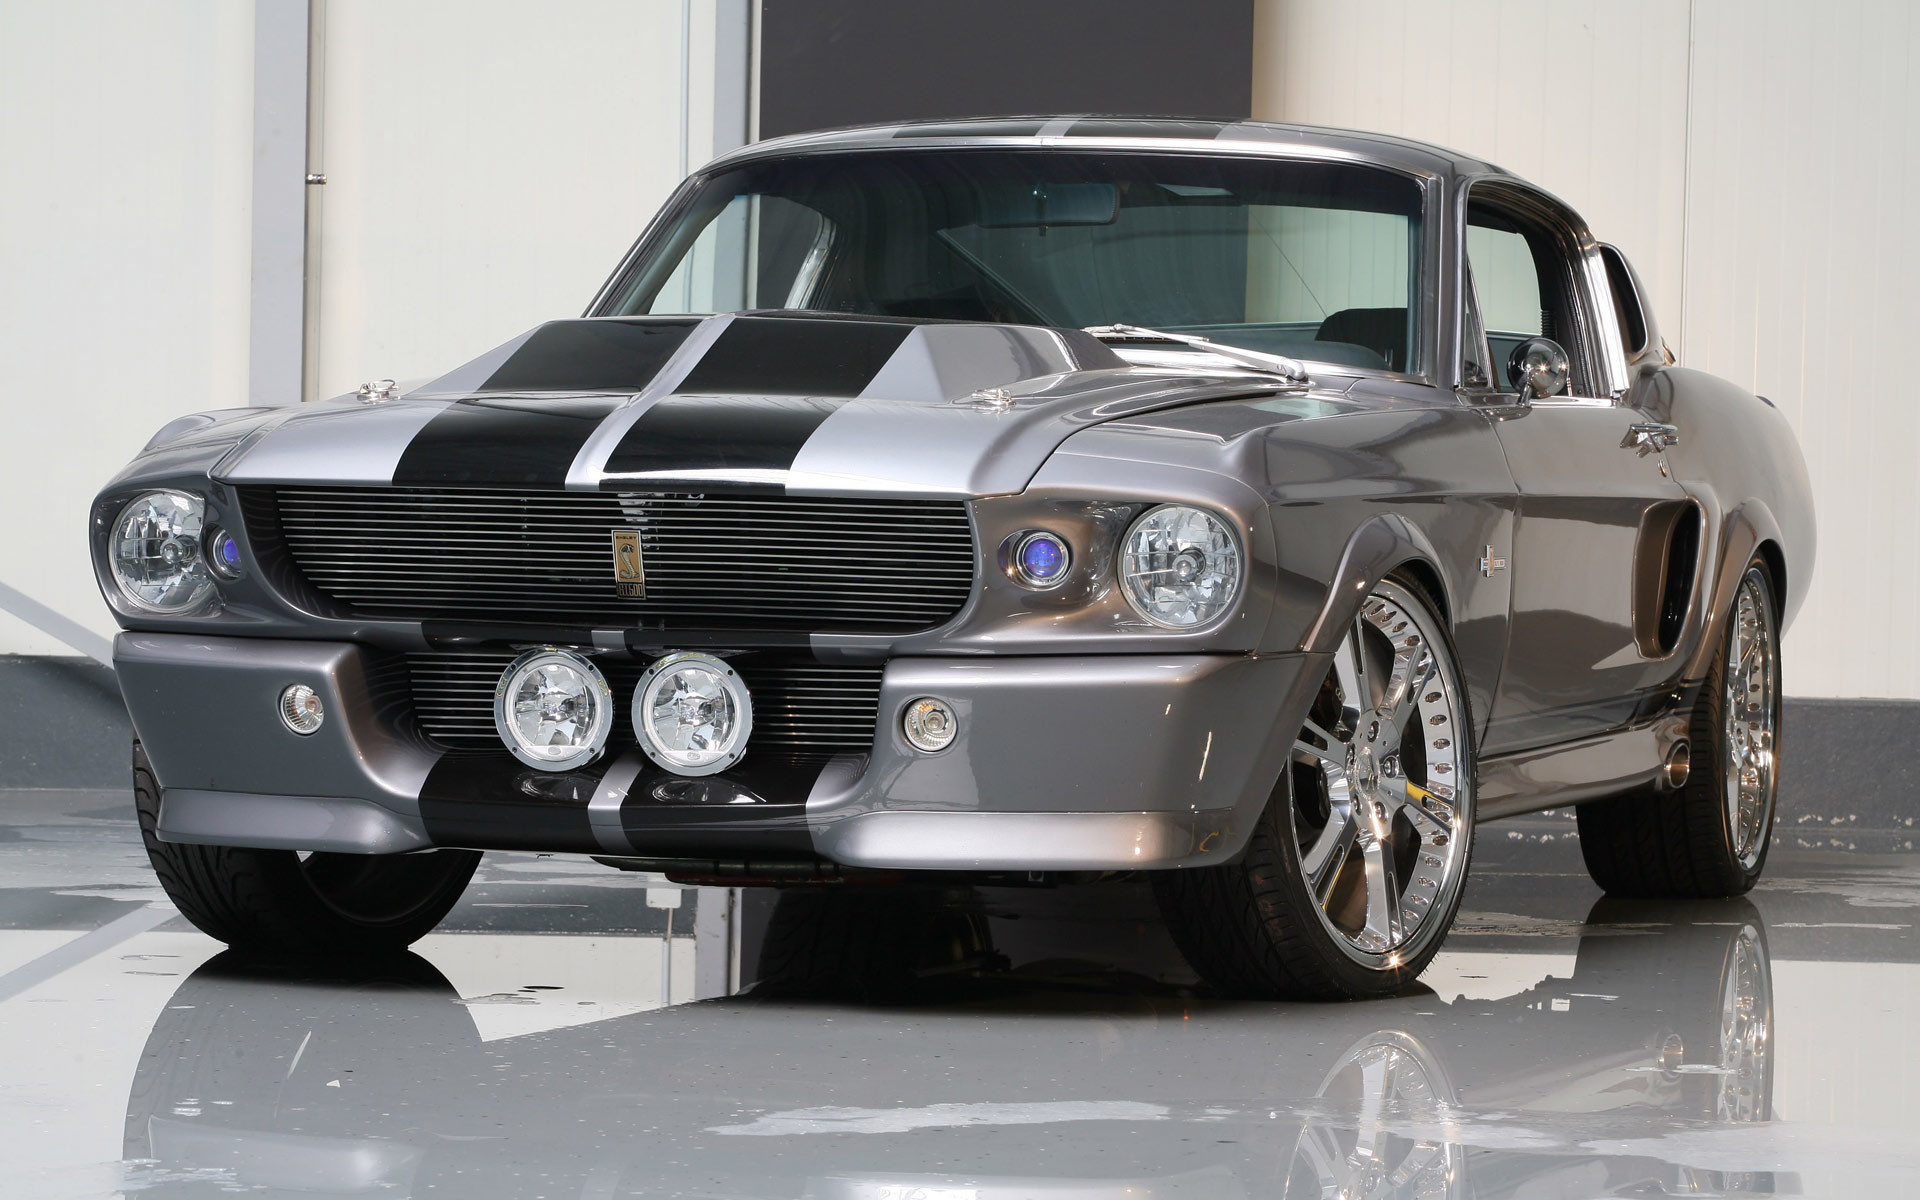 Ford Mustang Shelby GT500 Eleanor Ford car. 